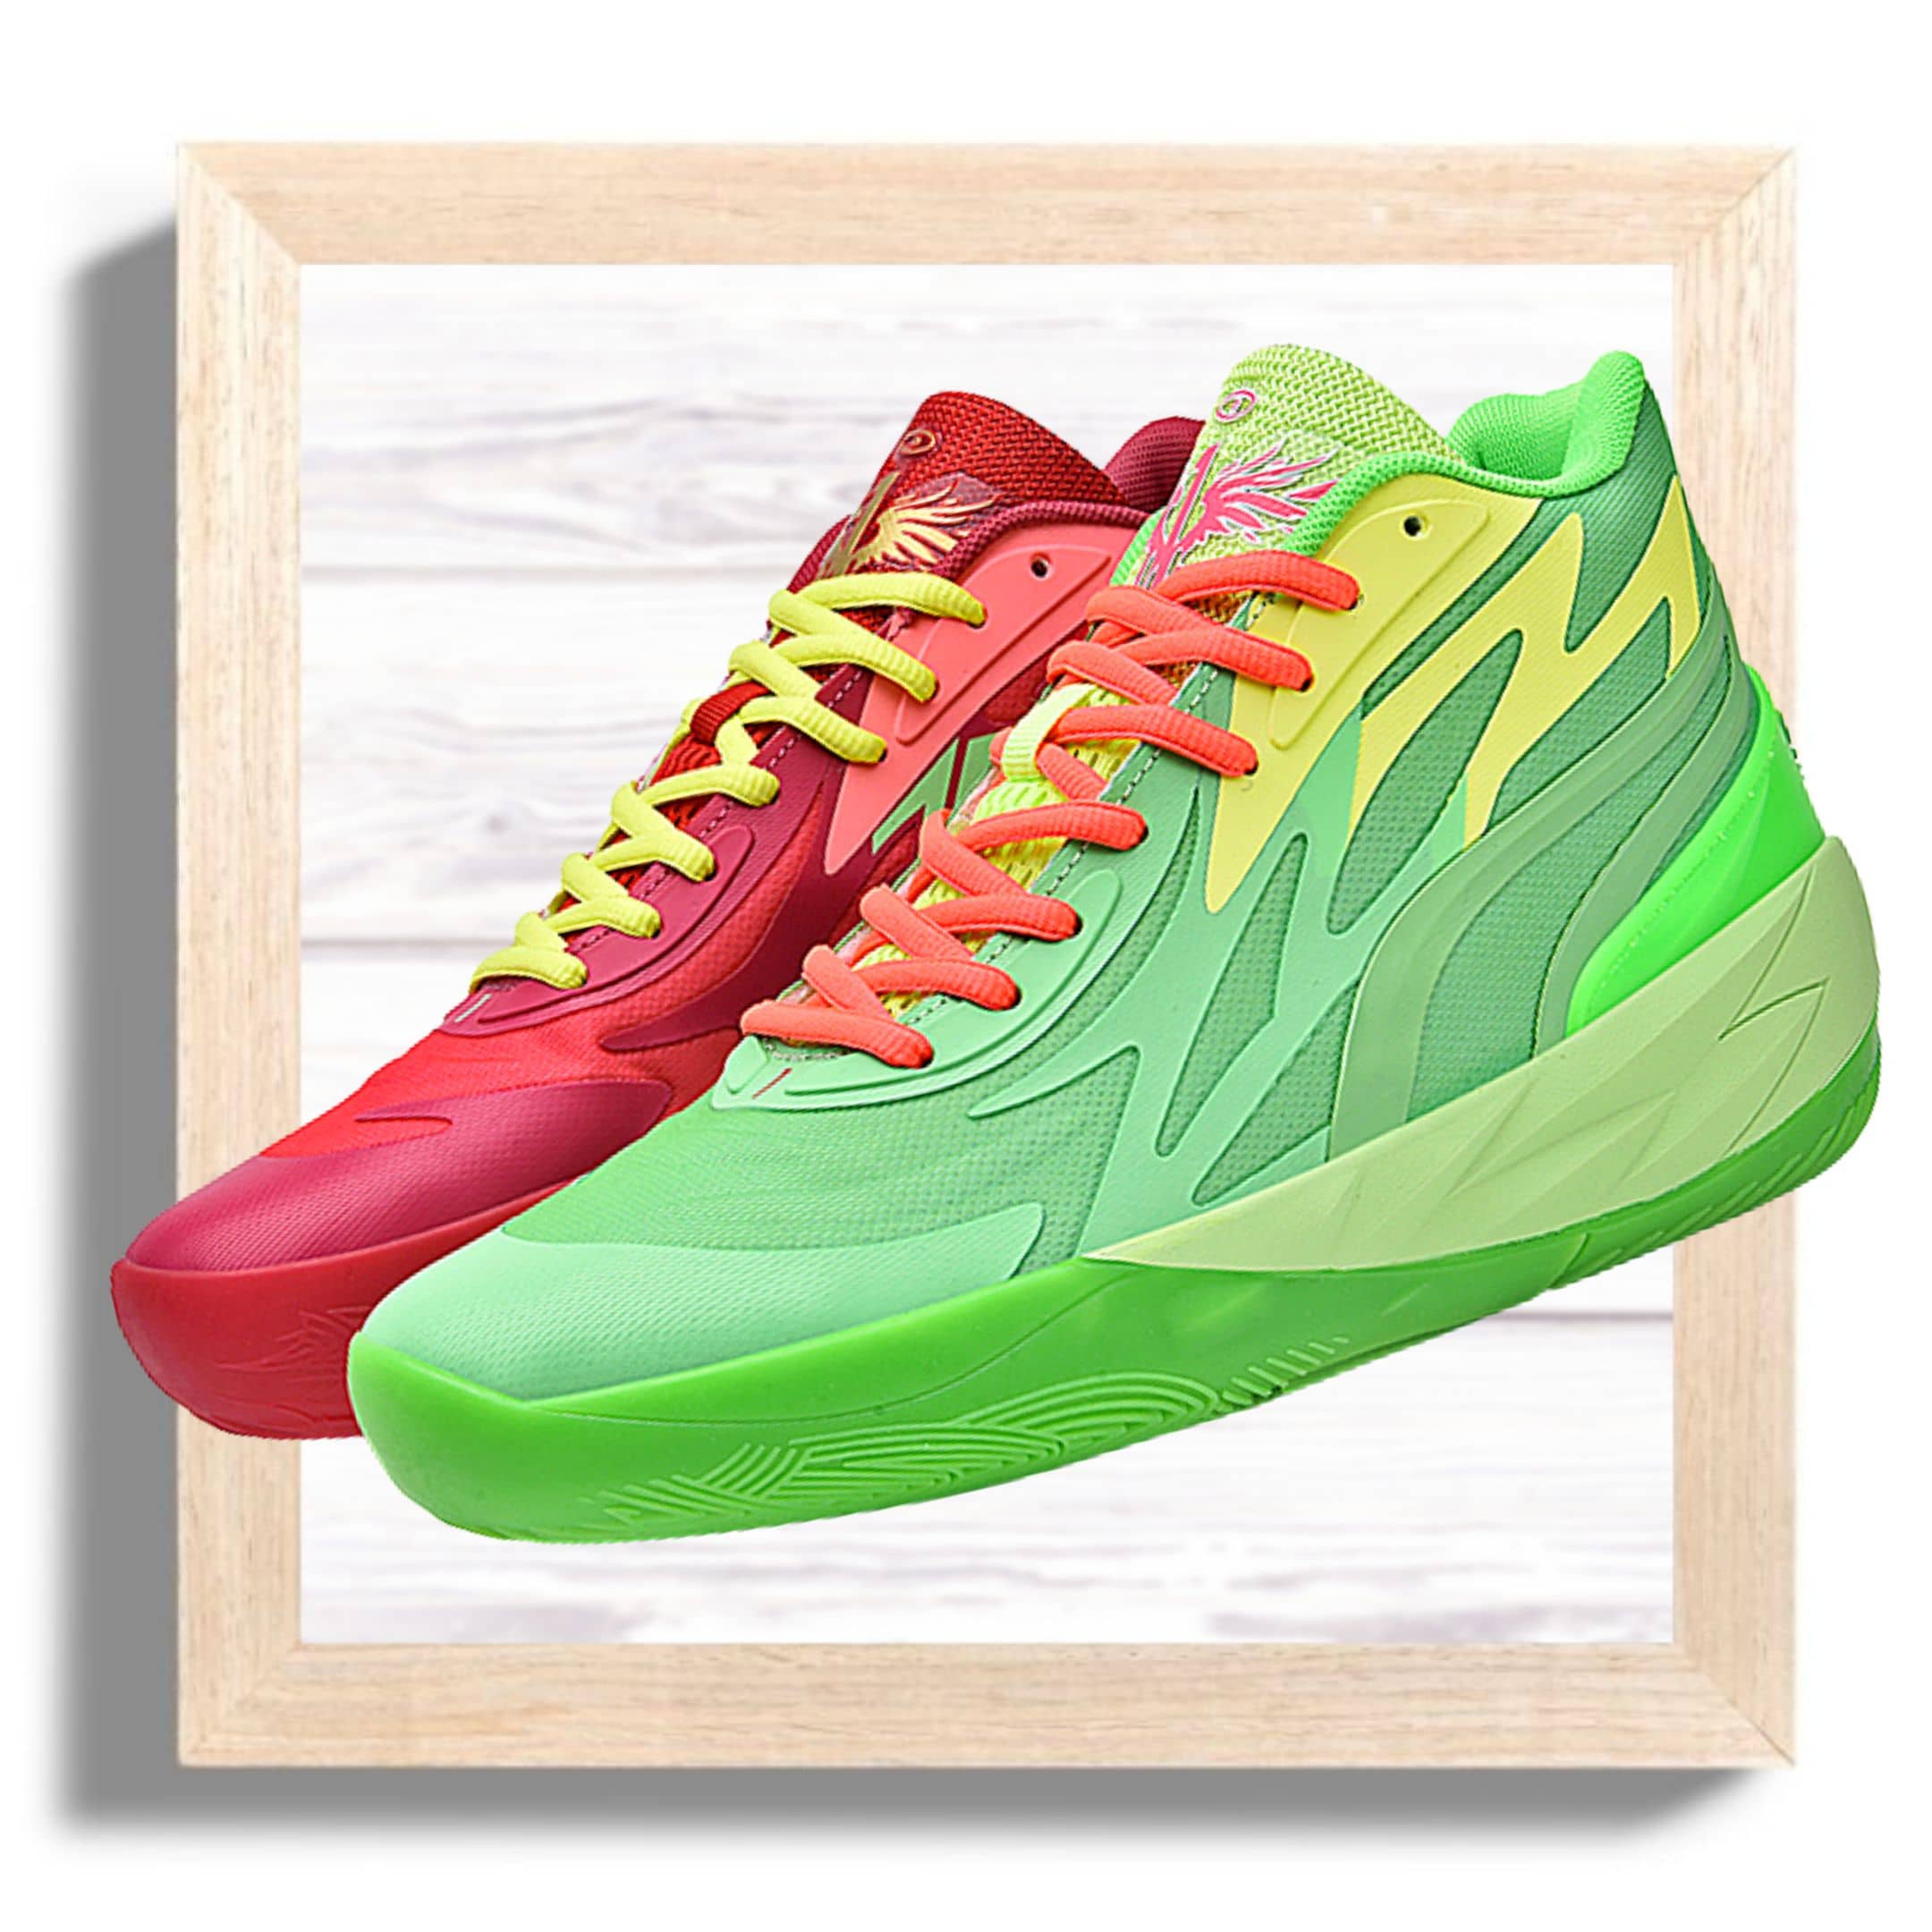 High Top Basketball Shoes - Our Products/Footwear - LaceGo